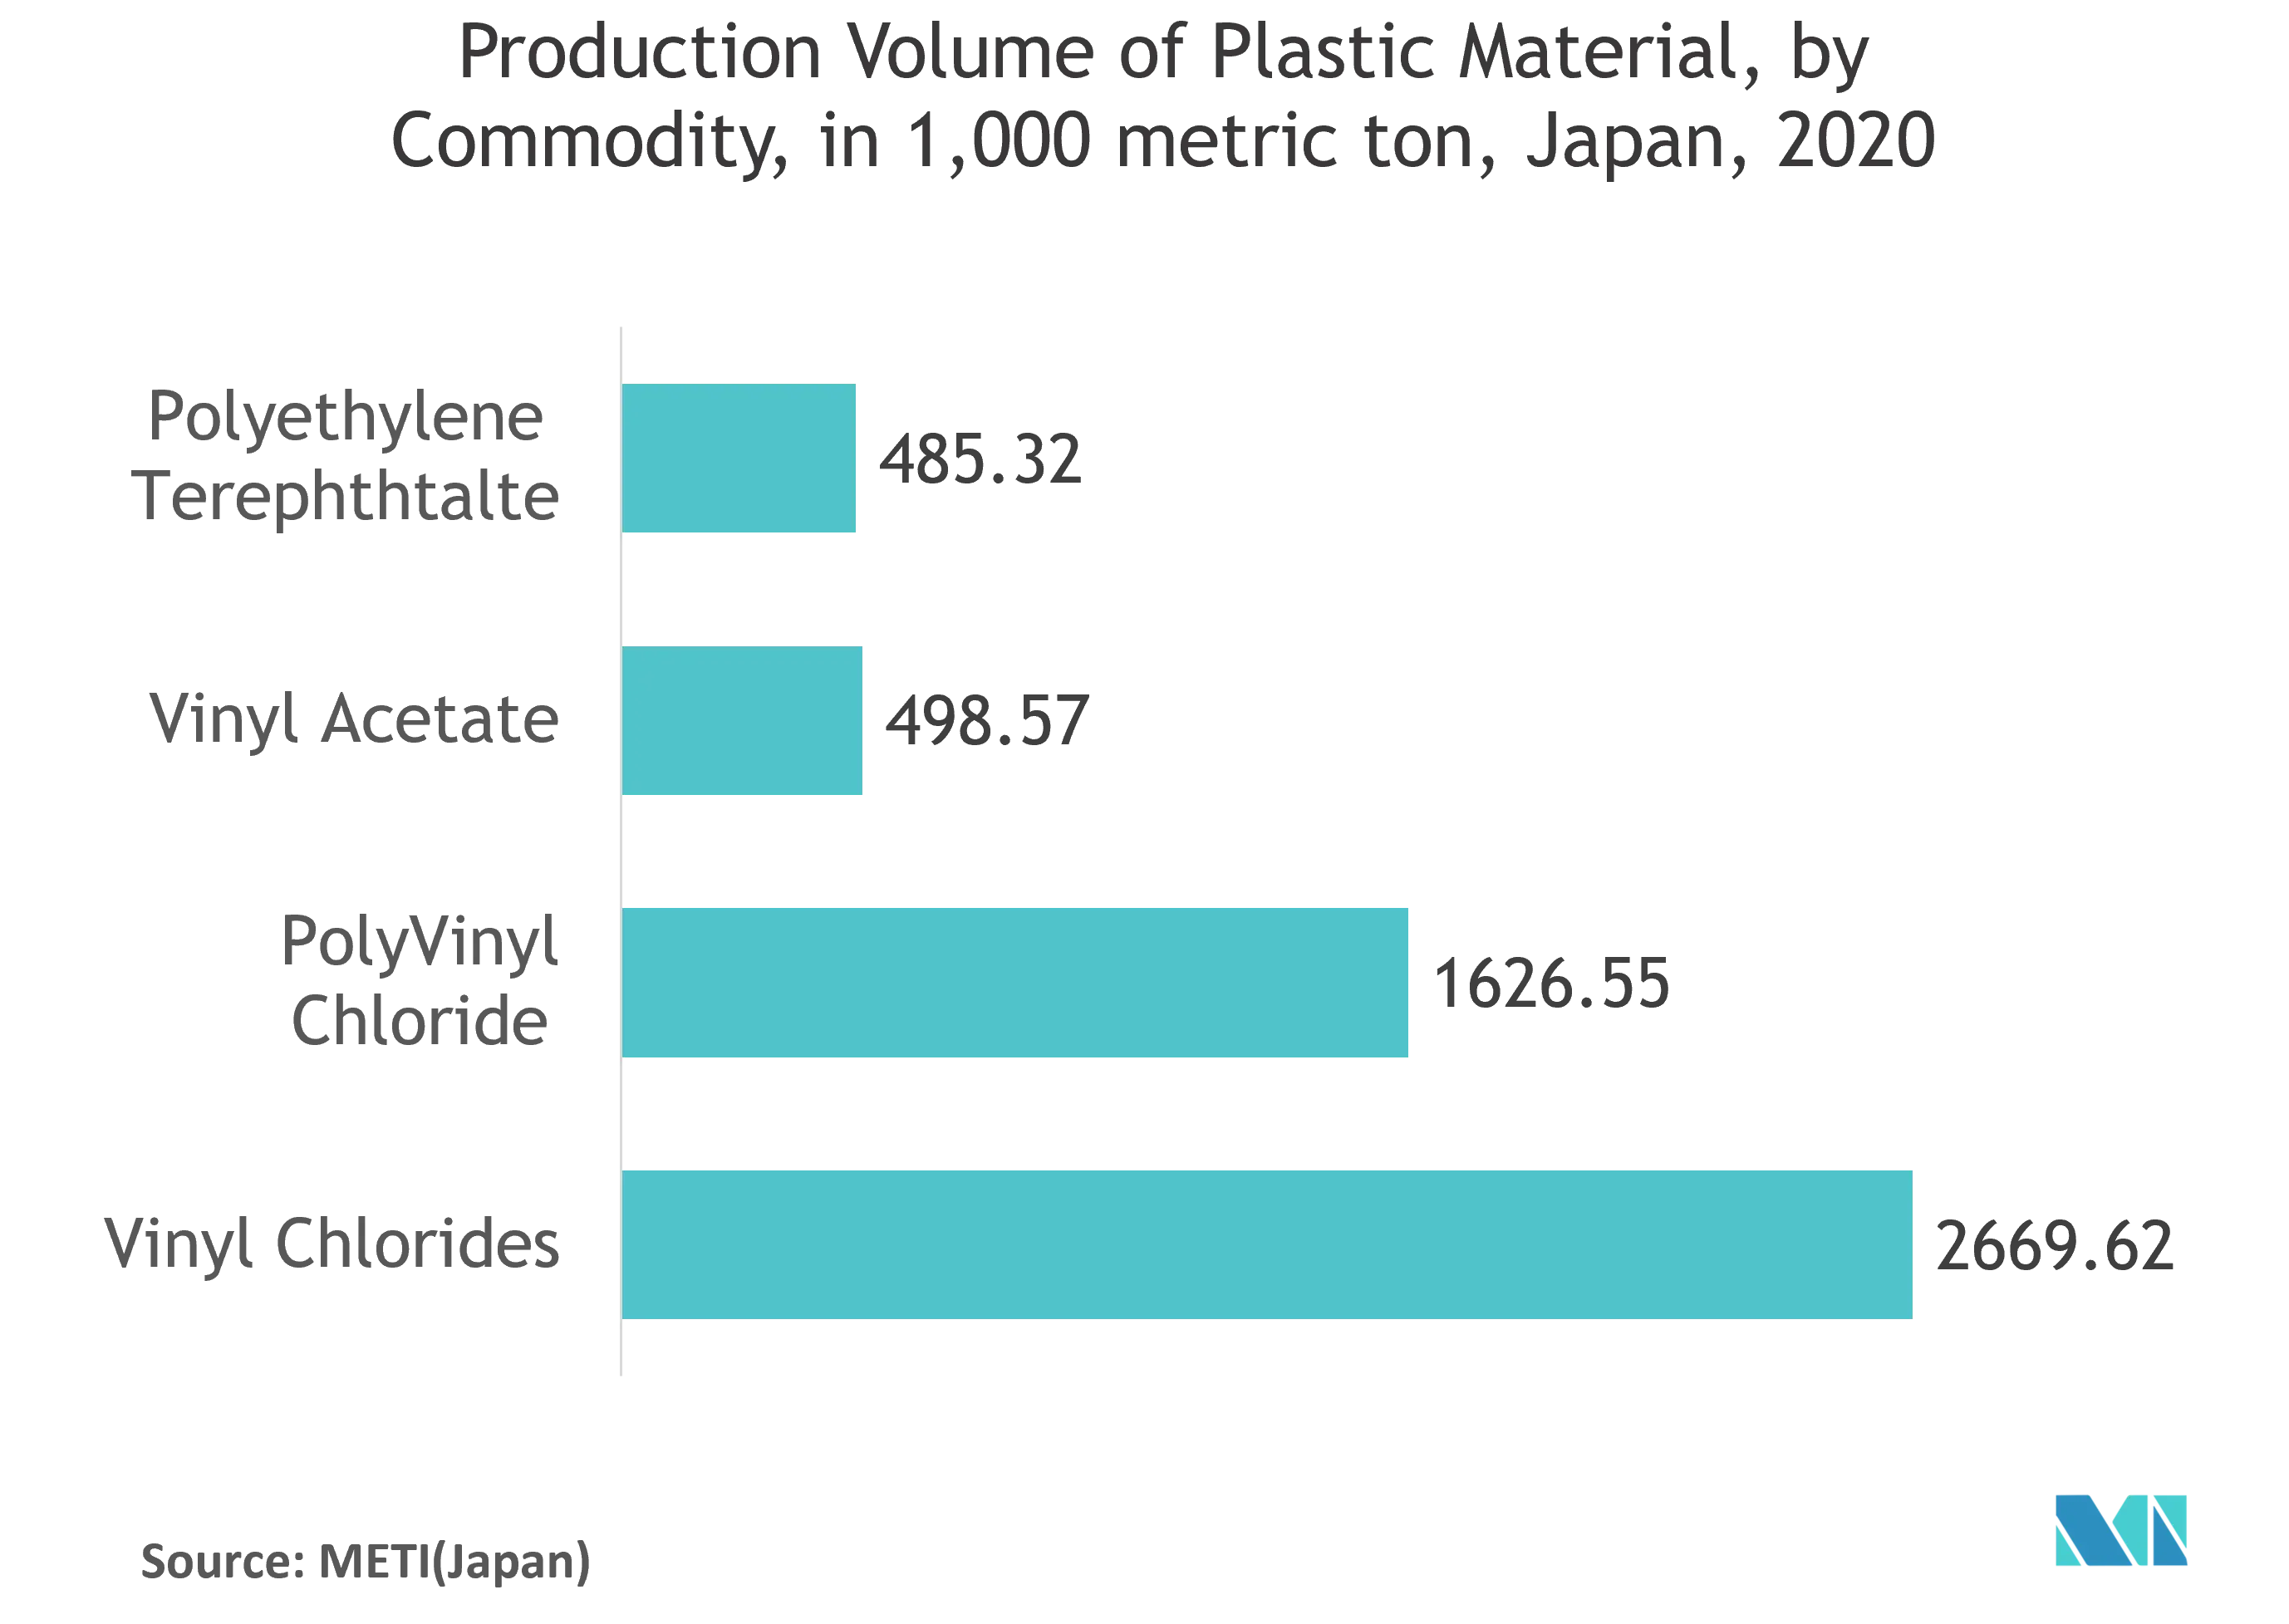 Japan Plastic Packaging Market: Production Volume of Plastic Material, by Commodity, in 1,090 metric ton, Japan, 2020